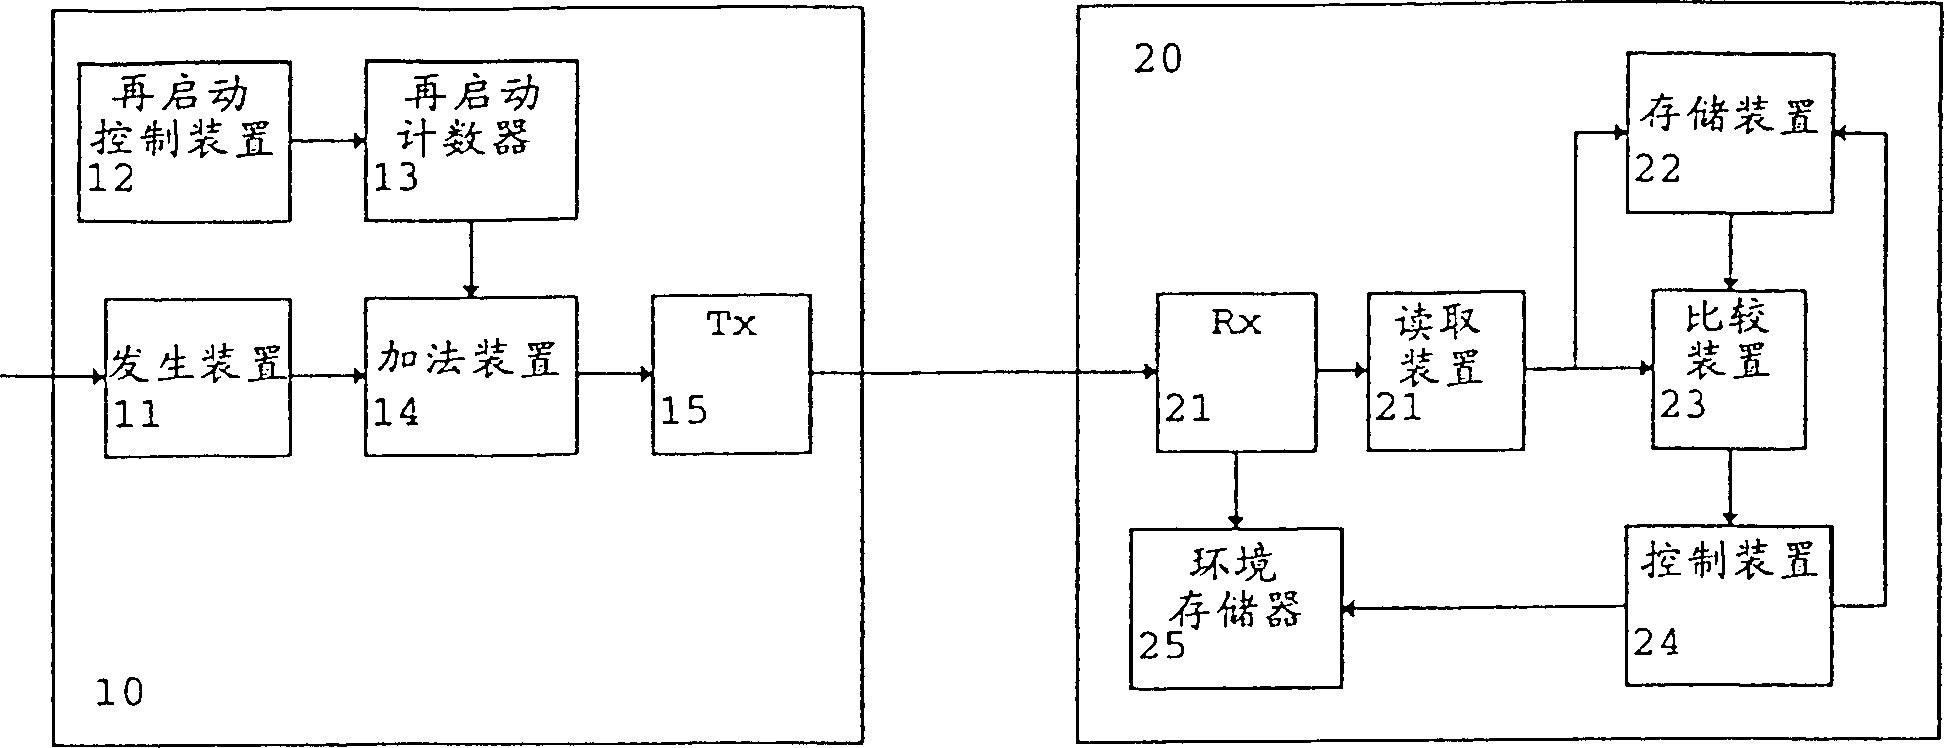 Method and system for restoring subscriber contex